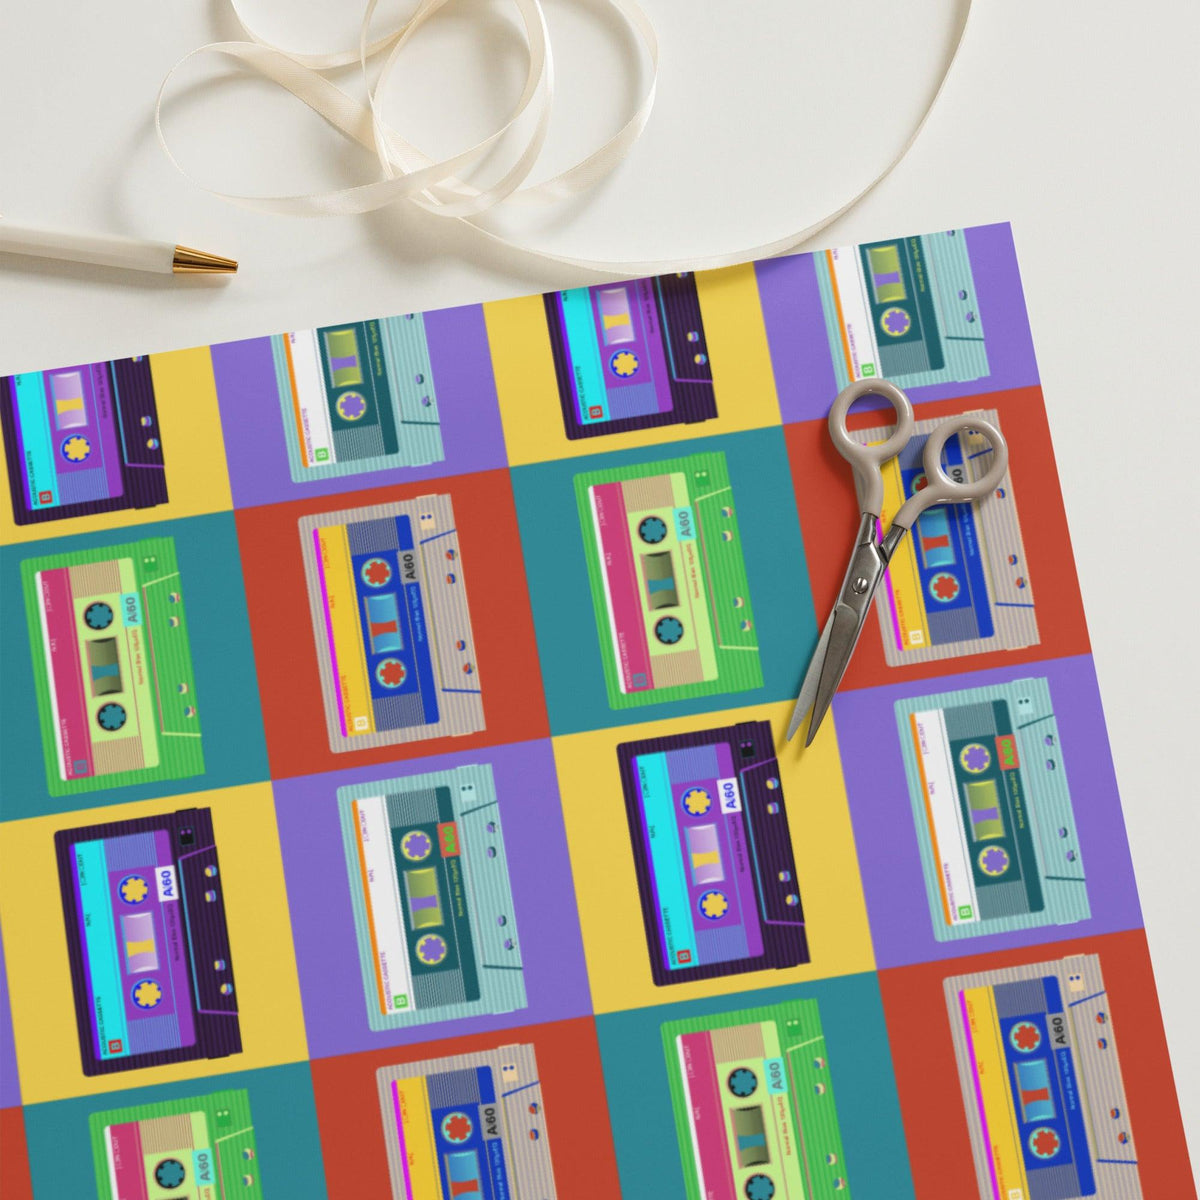 Vintage Cassette Tape | Andy Warhol Style Pop Art Wrapping Paper Sheets (3 rolls) - Tedeschi Studio, LLC.